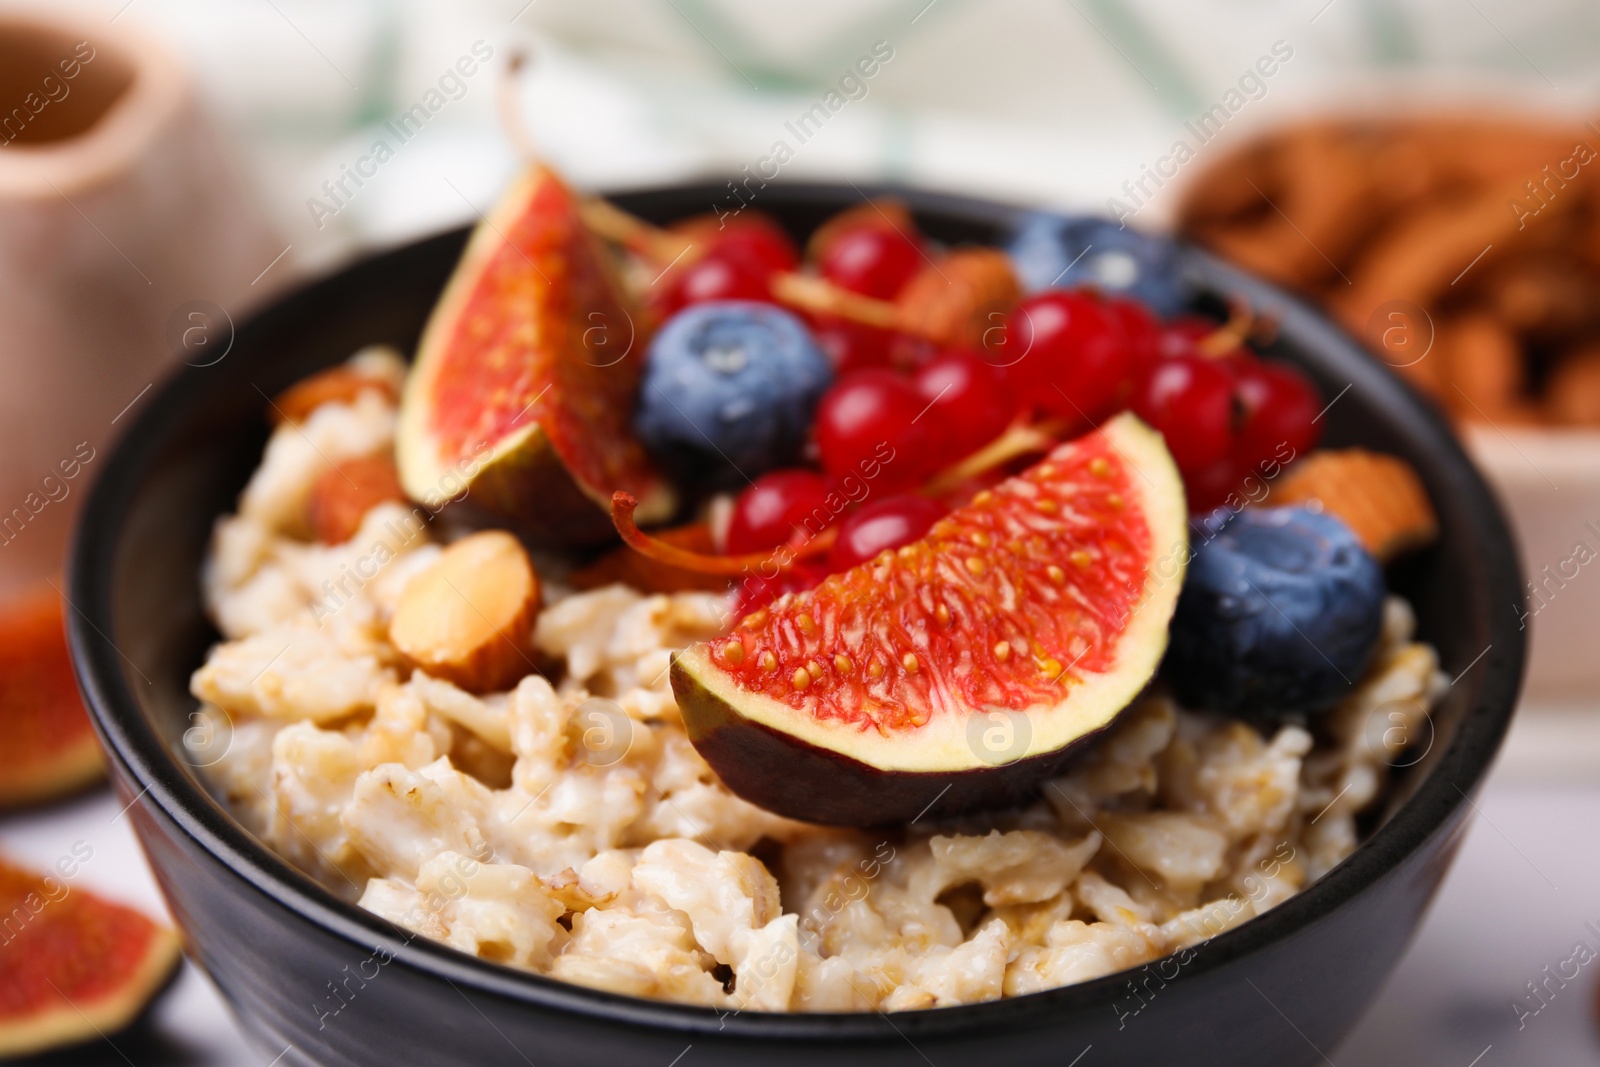 Photo of Bowl of oatmeal with berries, almonds and fig pieces on table, closeup